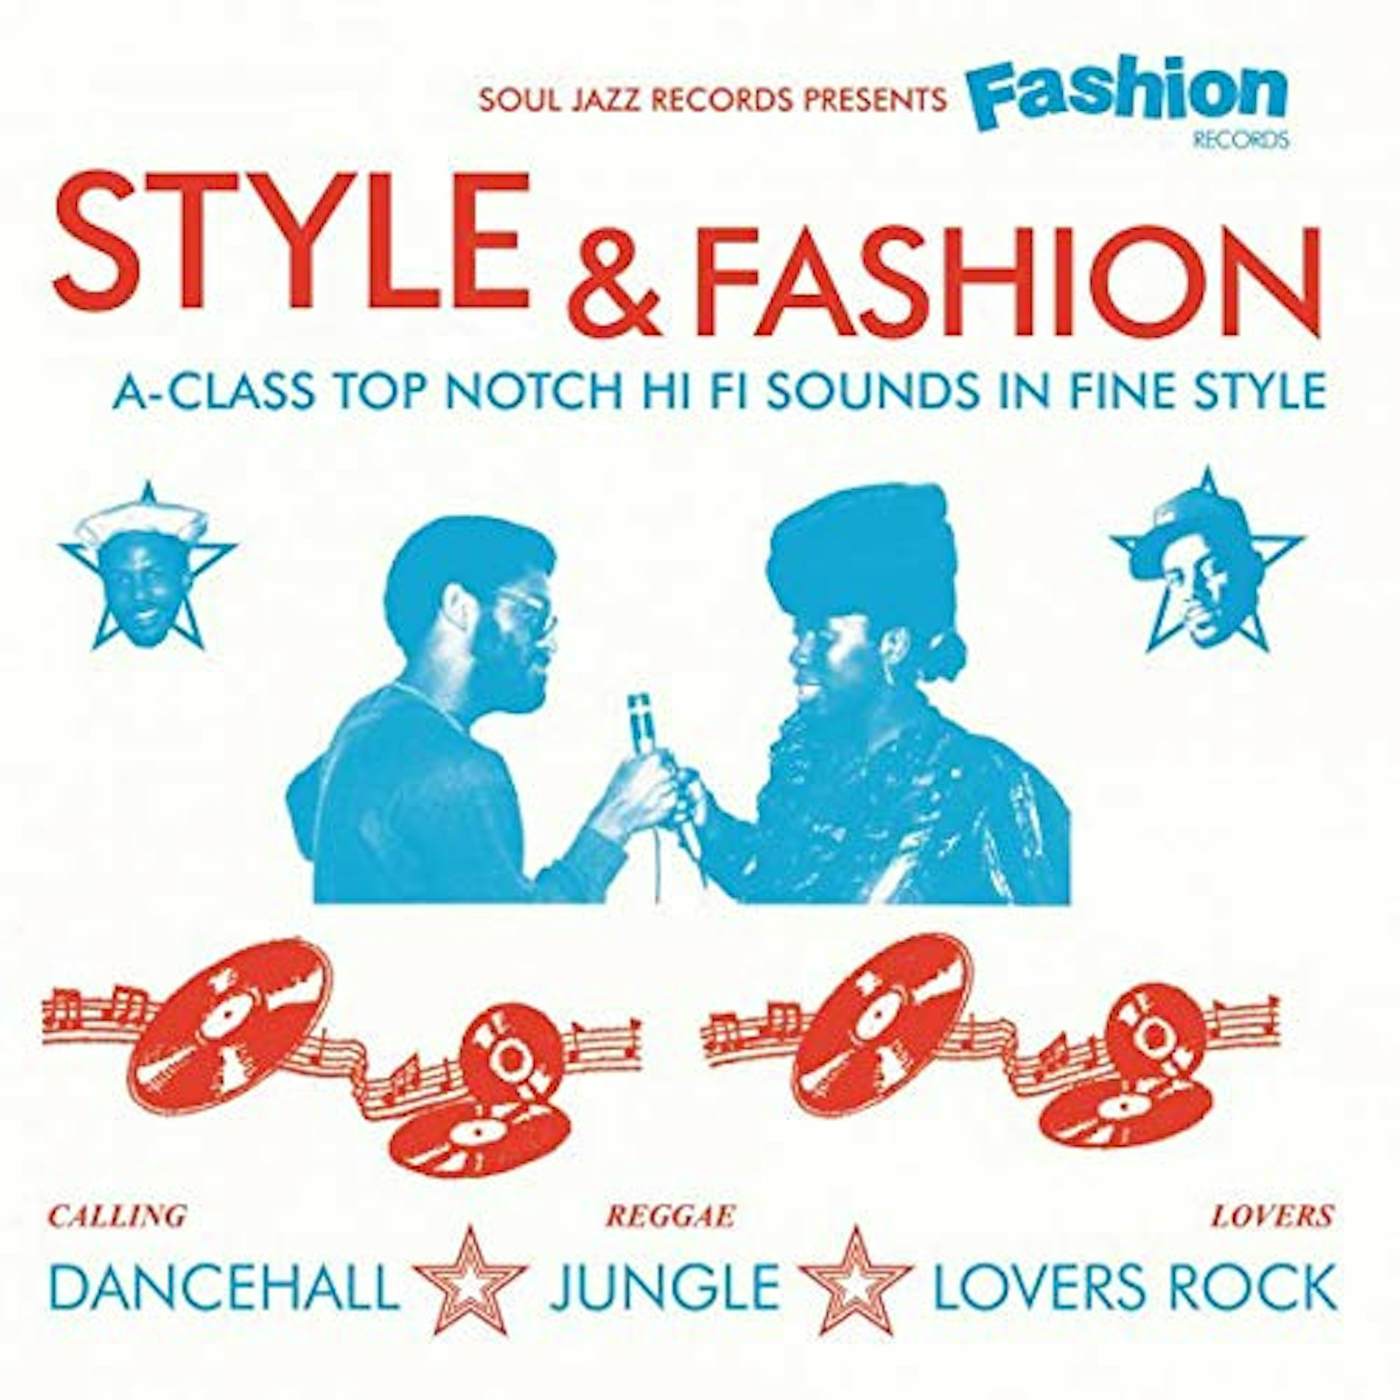 General Levy / Laurel & Hardy / Cutty Ranks SOUL JAZZ RECORDS PRESENTS FASHION RECORDS Vinyl Record